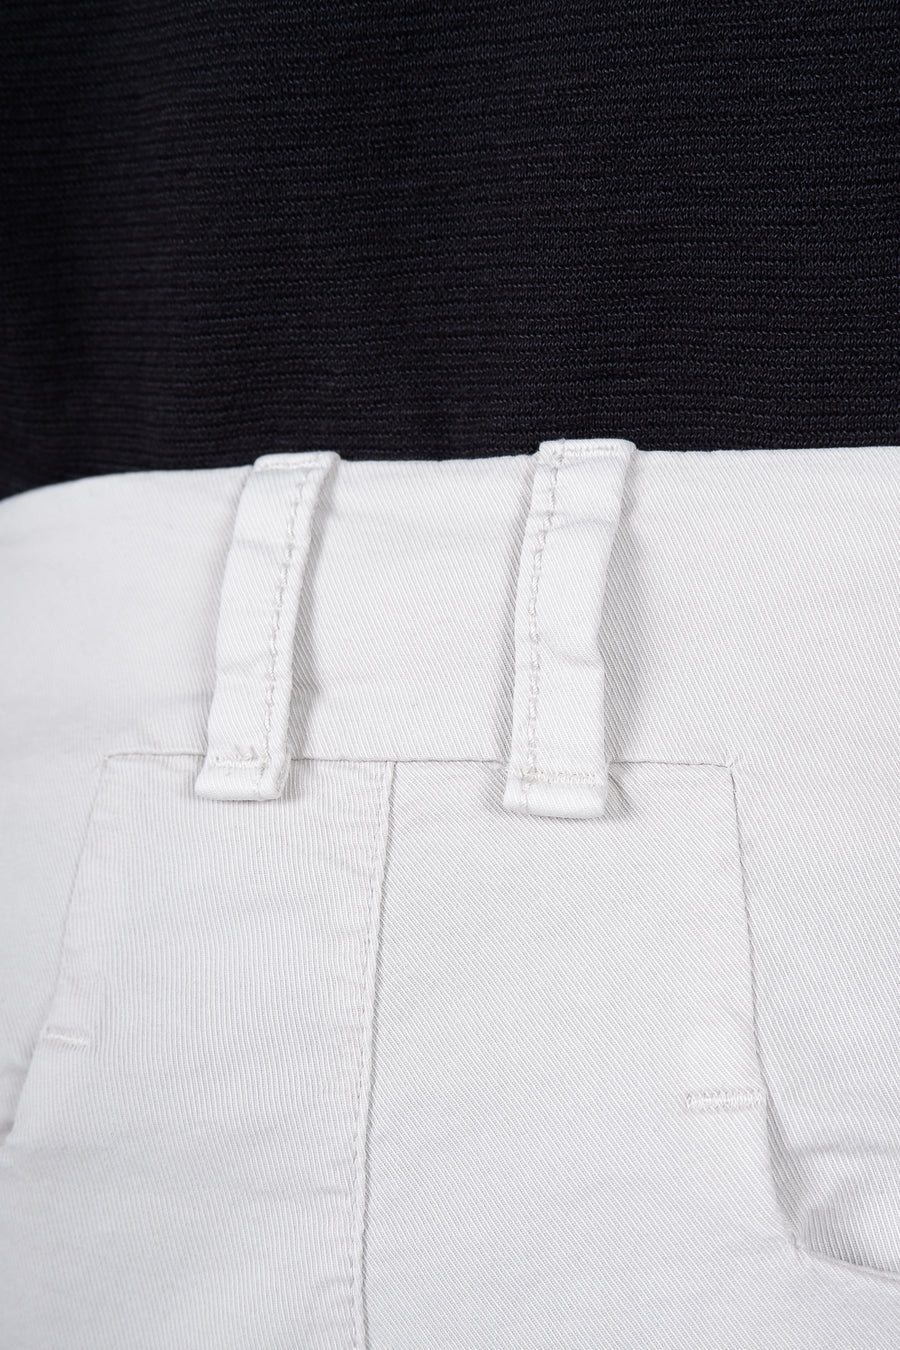 Buy the Transit Italian Cotton Slip Pocket Detail Chino in Ice at Intro. Spend £50 for free UK delivery. Official stockists. We ship worldwide.